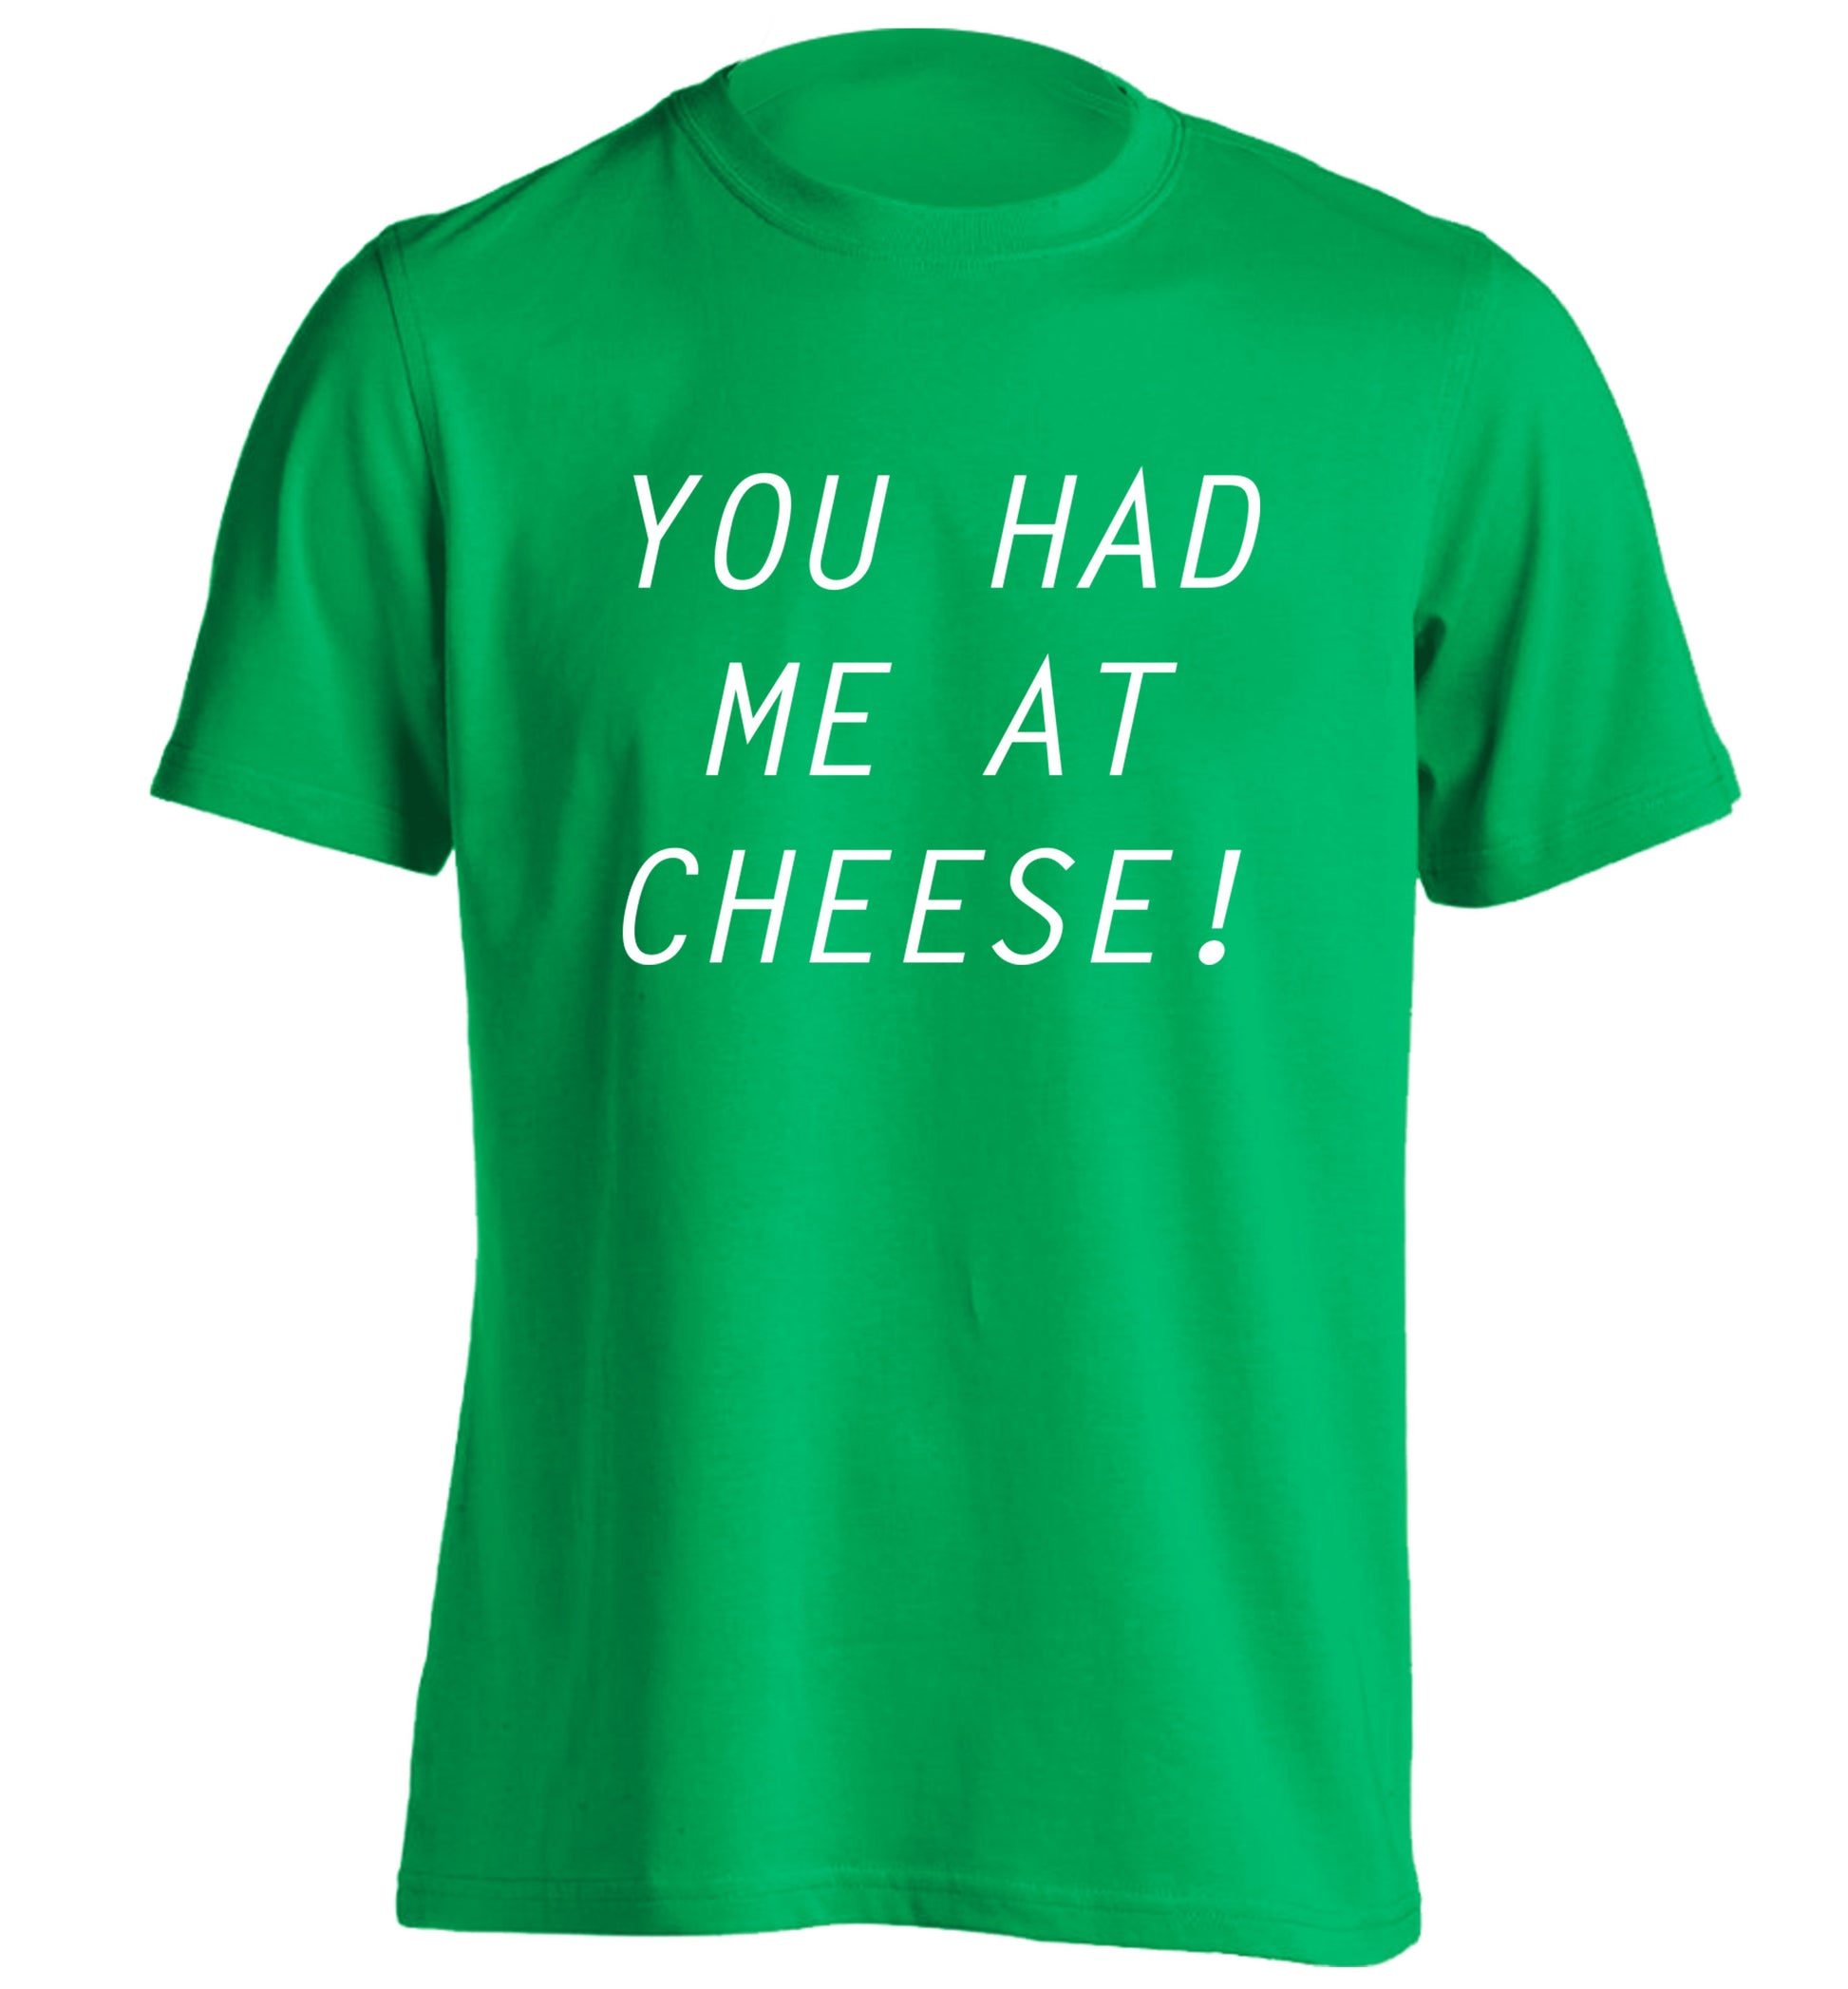 You had me at cheese adults unisex green Tshirt 2XL